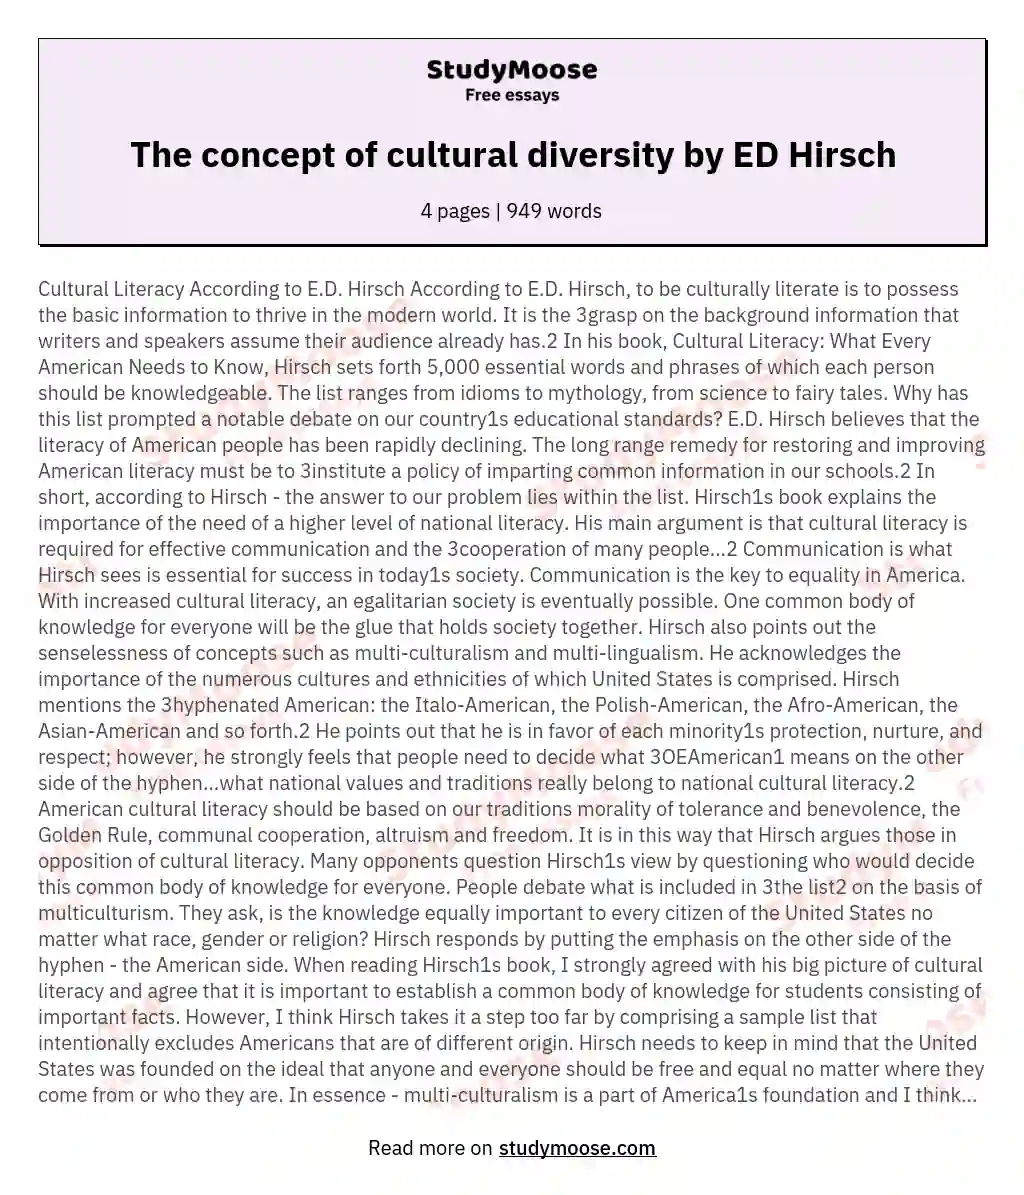 The concept of cultural diversity by ED Hirsch essay